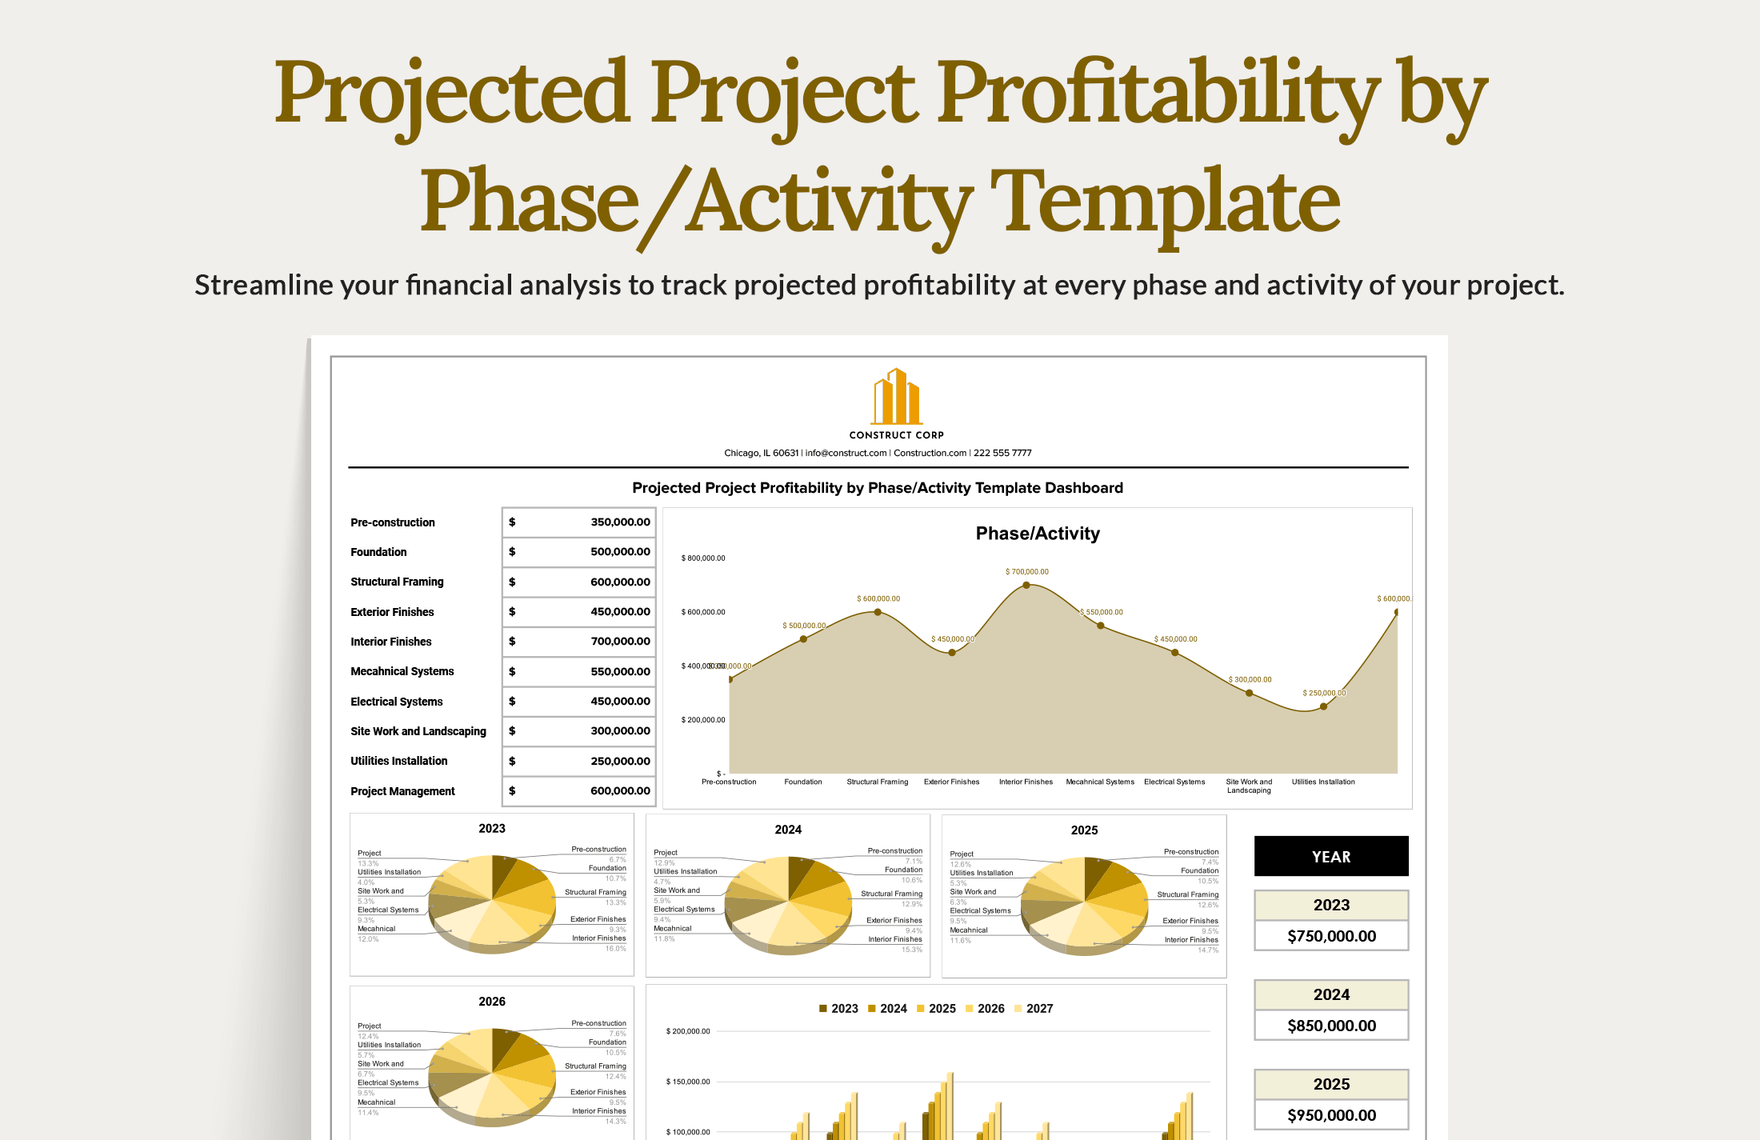 Projected Project Profitability by Phase/Activity Template